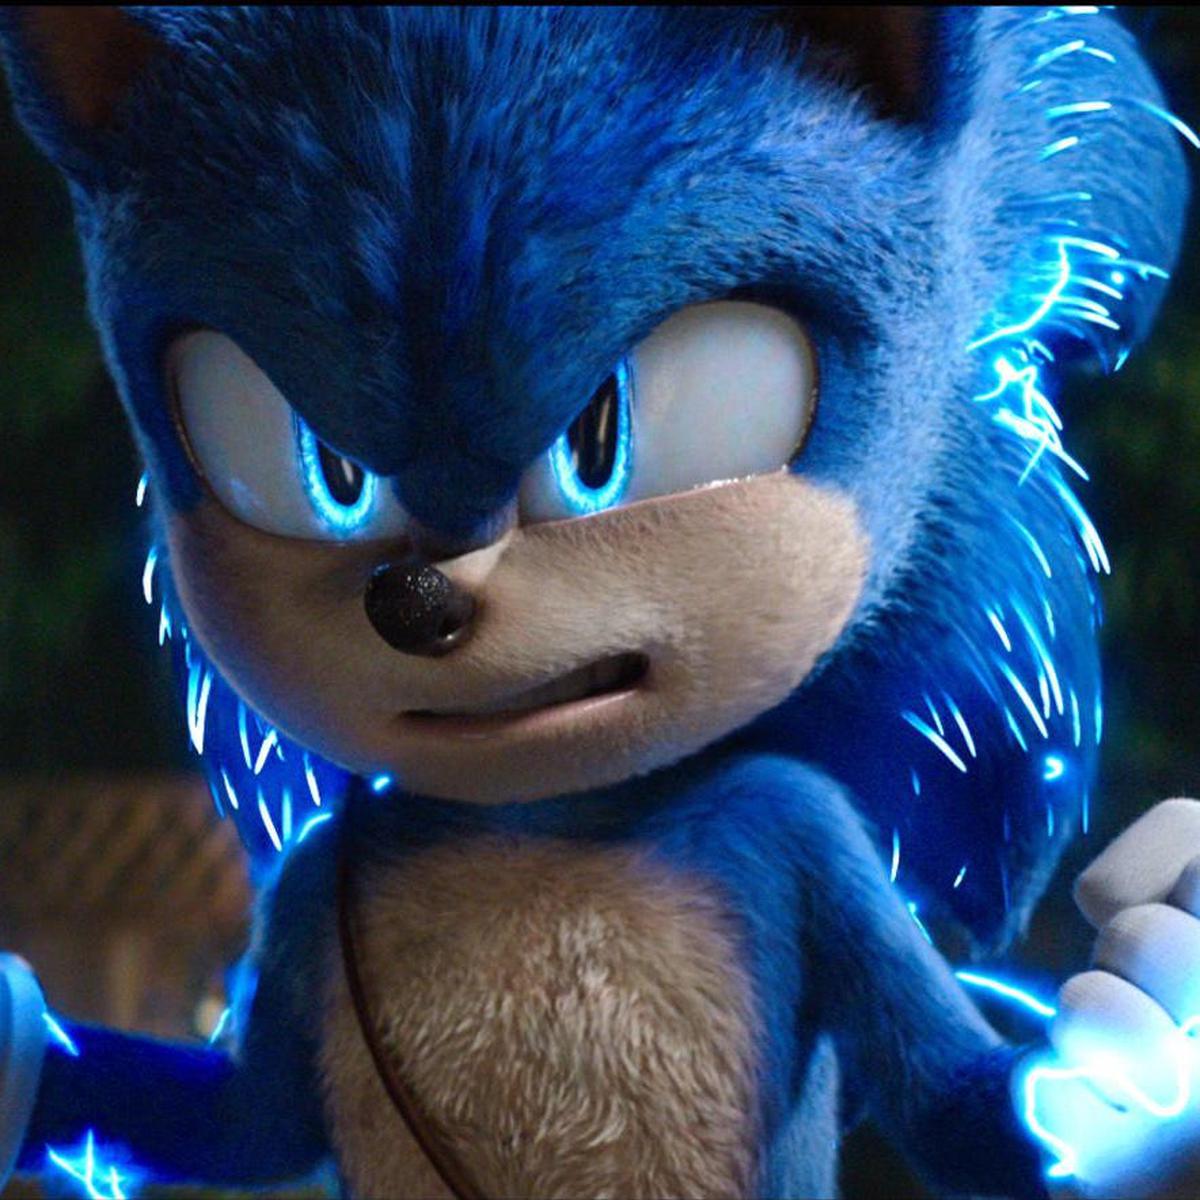 First look at Shadow in 'SONIC 3'. In theaters on December 20